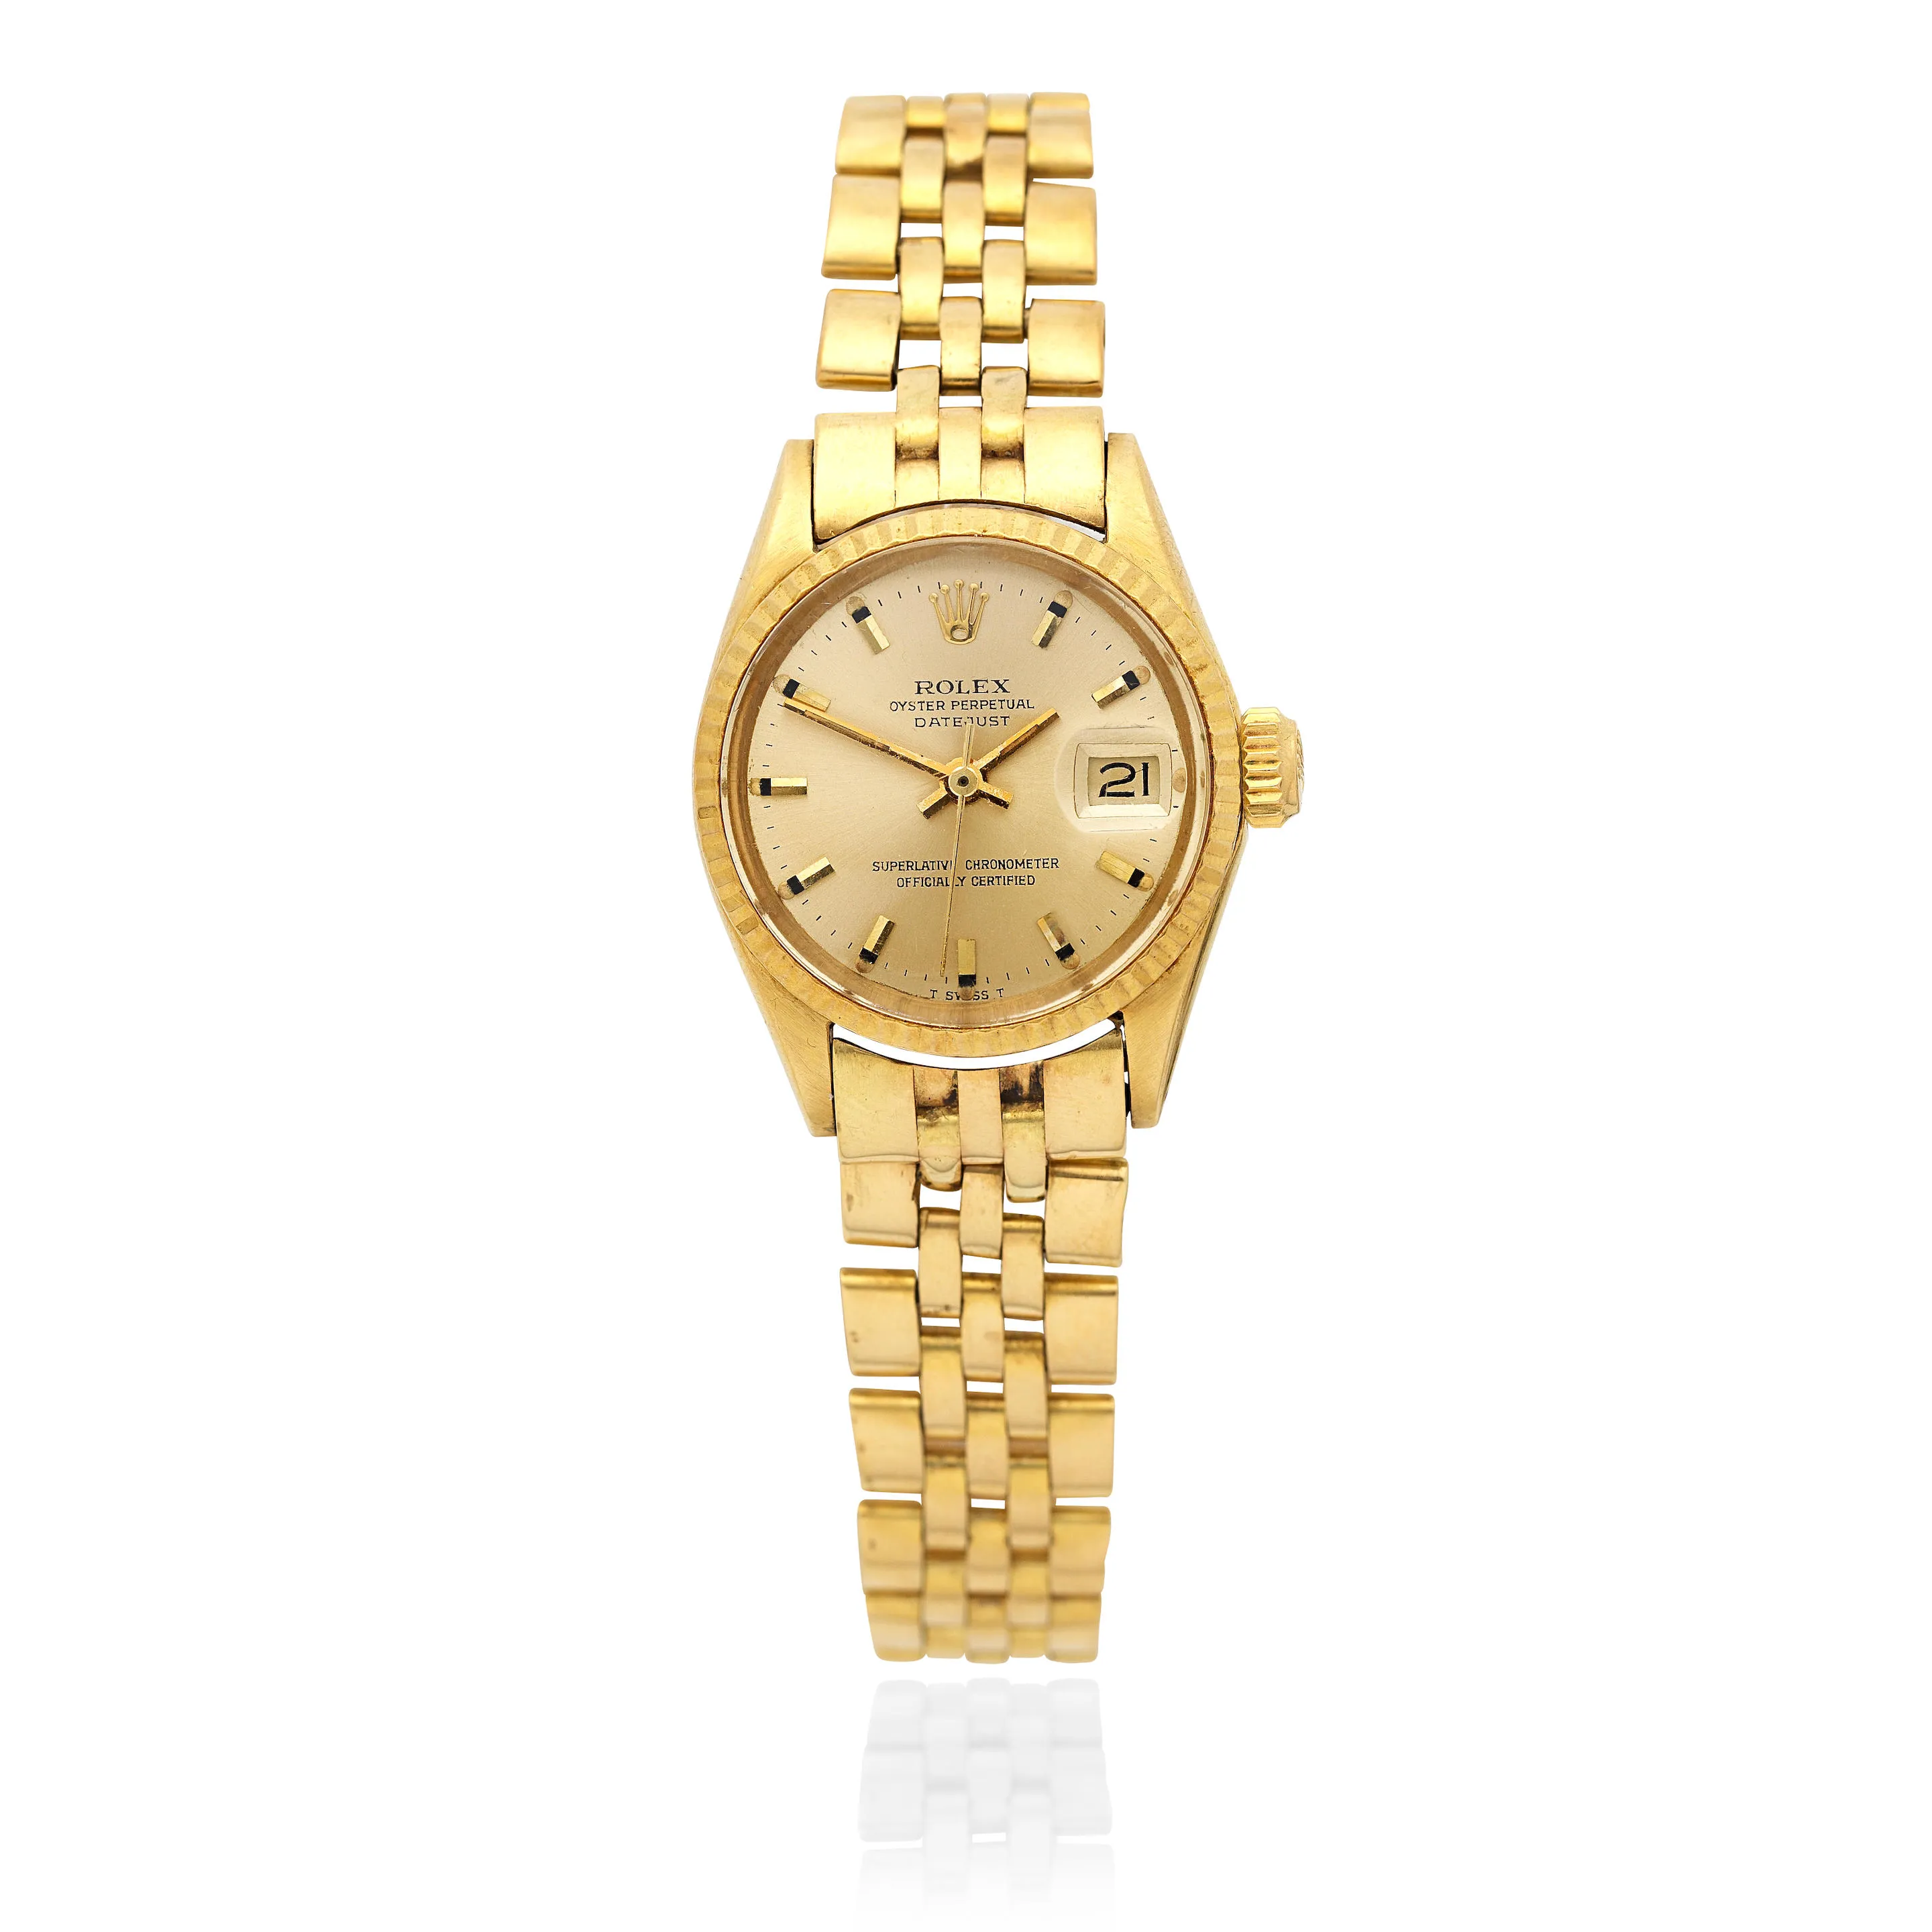 Rolex Datejust 6517 26mm Yellow gold Champagne